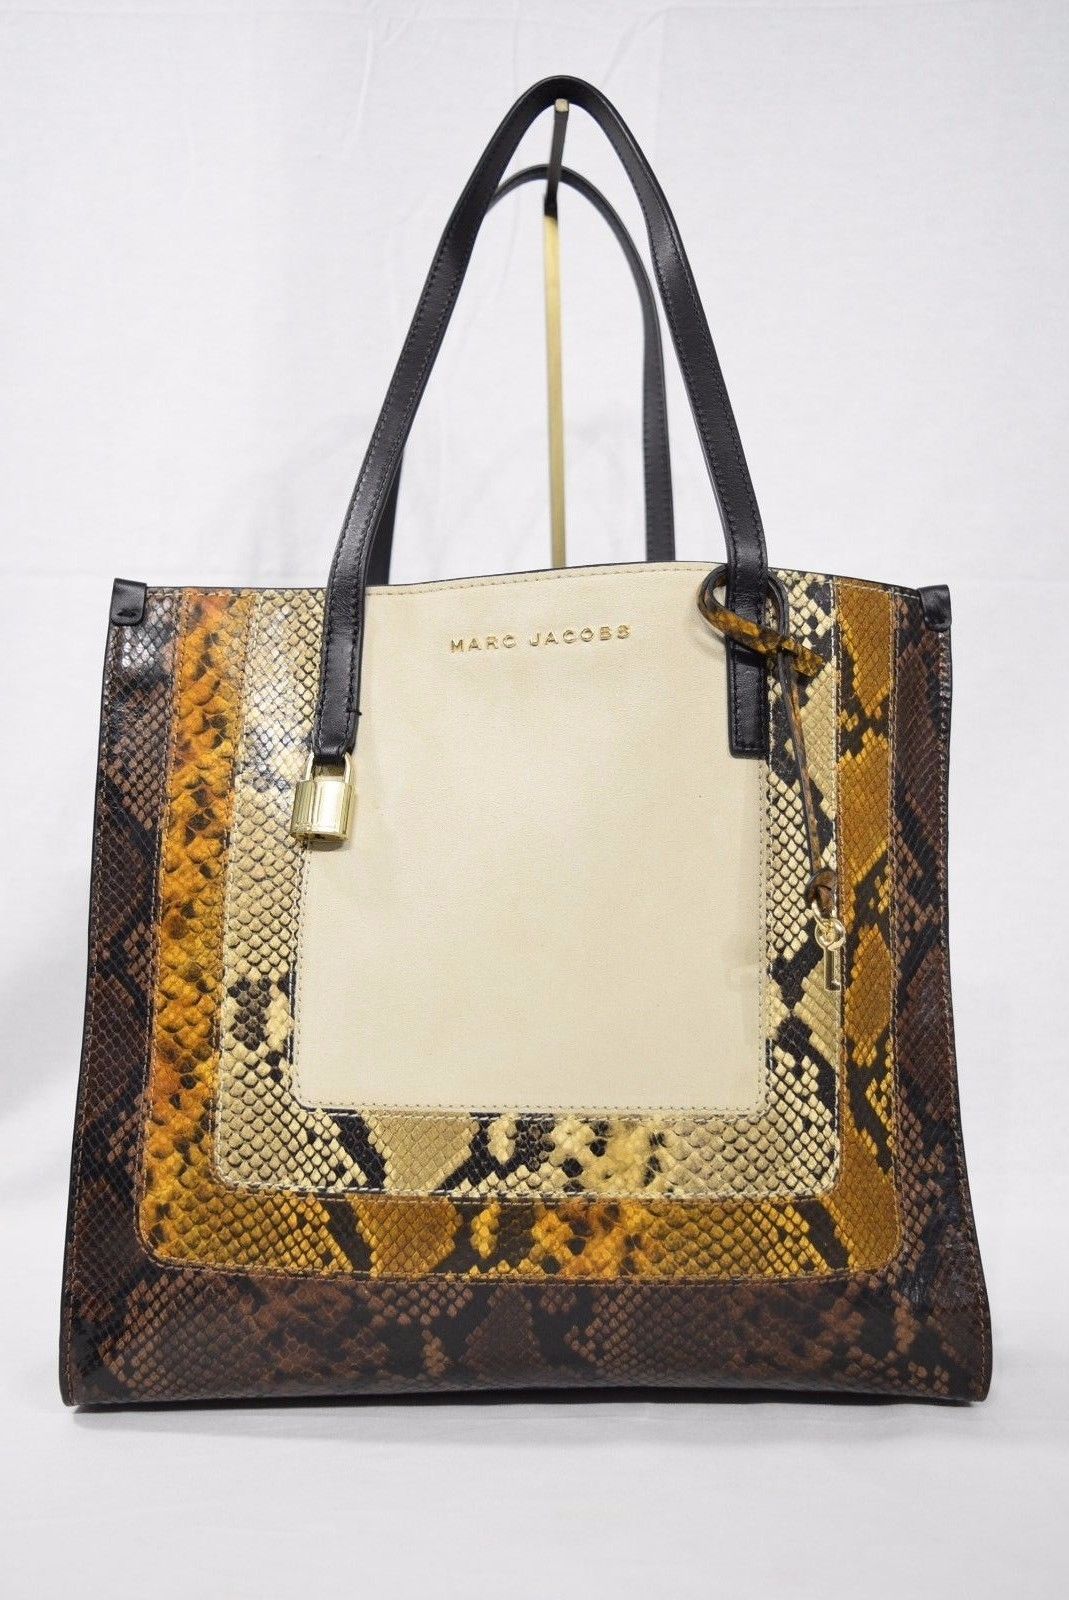 MARC By Marc Jacobs M0012901 The Snake Grind Shopper Tote Bag in Papyrus Multi - $439.00